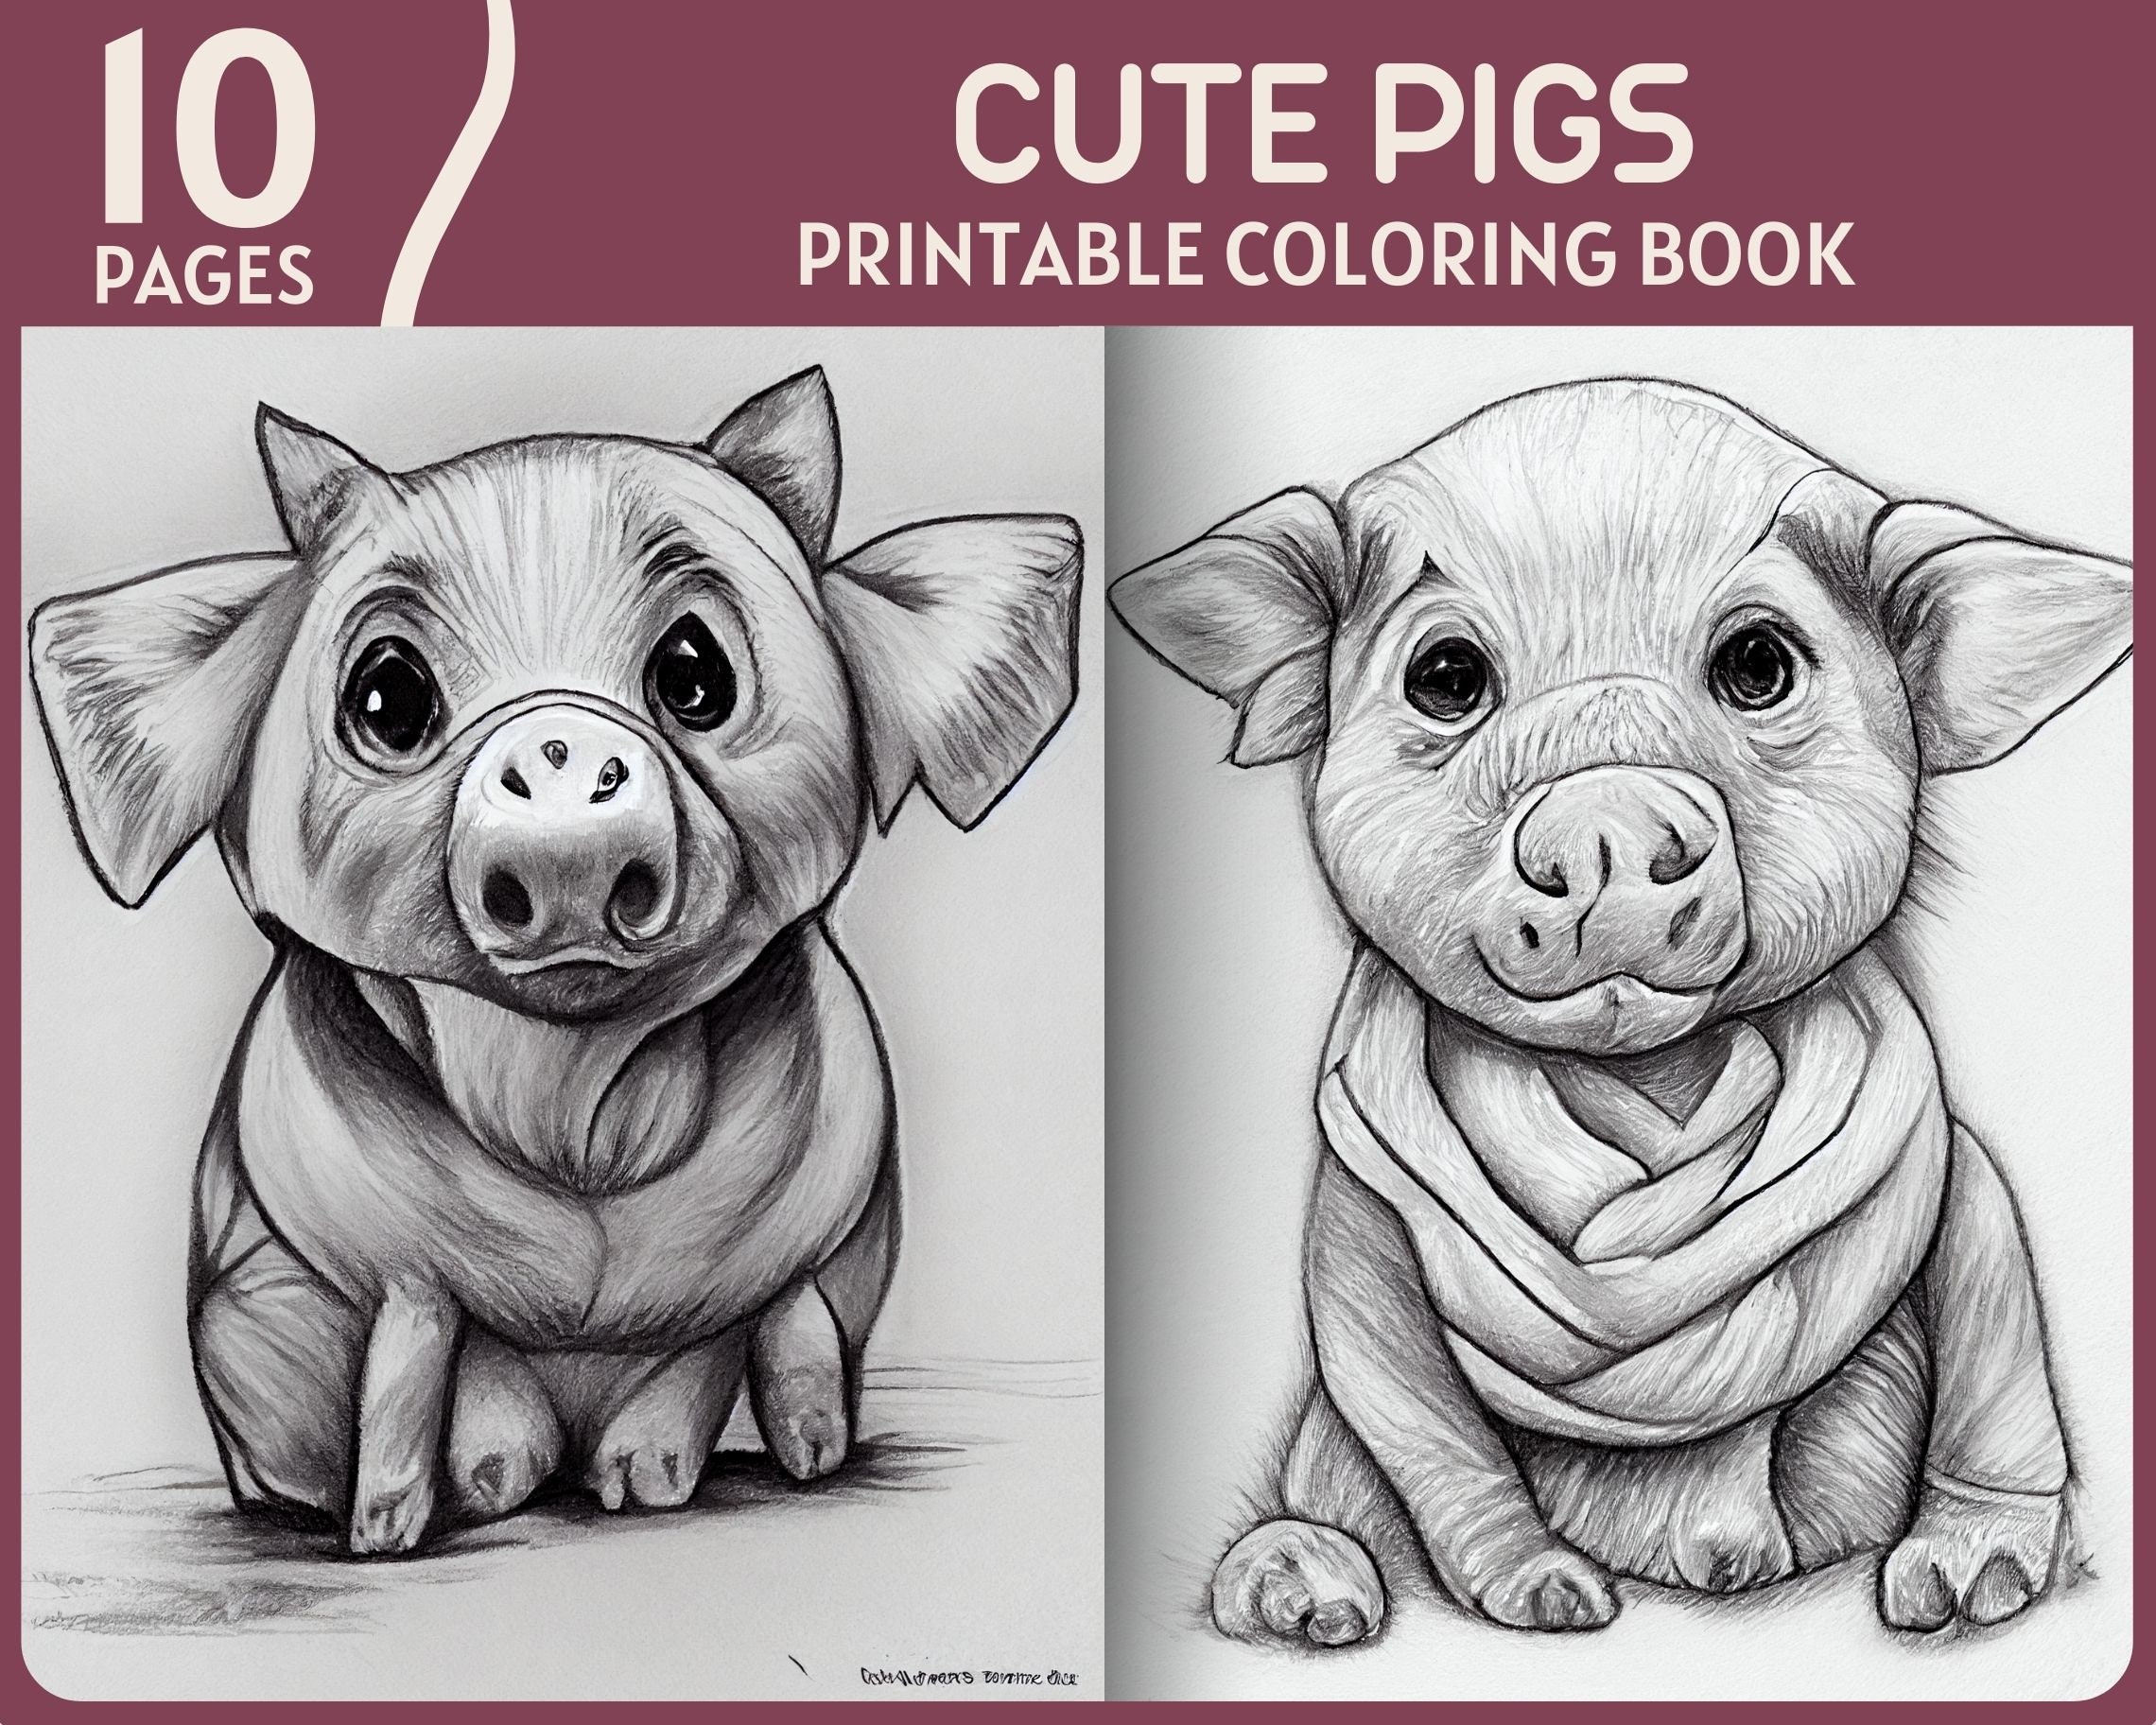 Cute pigs coloring pages realistic pig illustrations printable coloring book pig animal drawings instant download